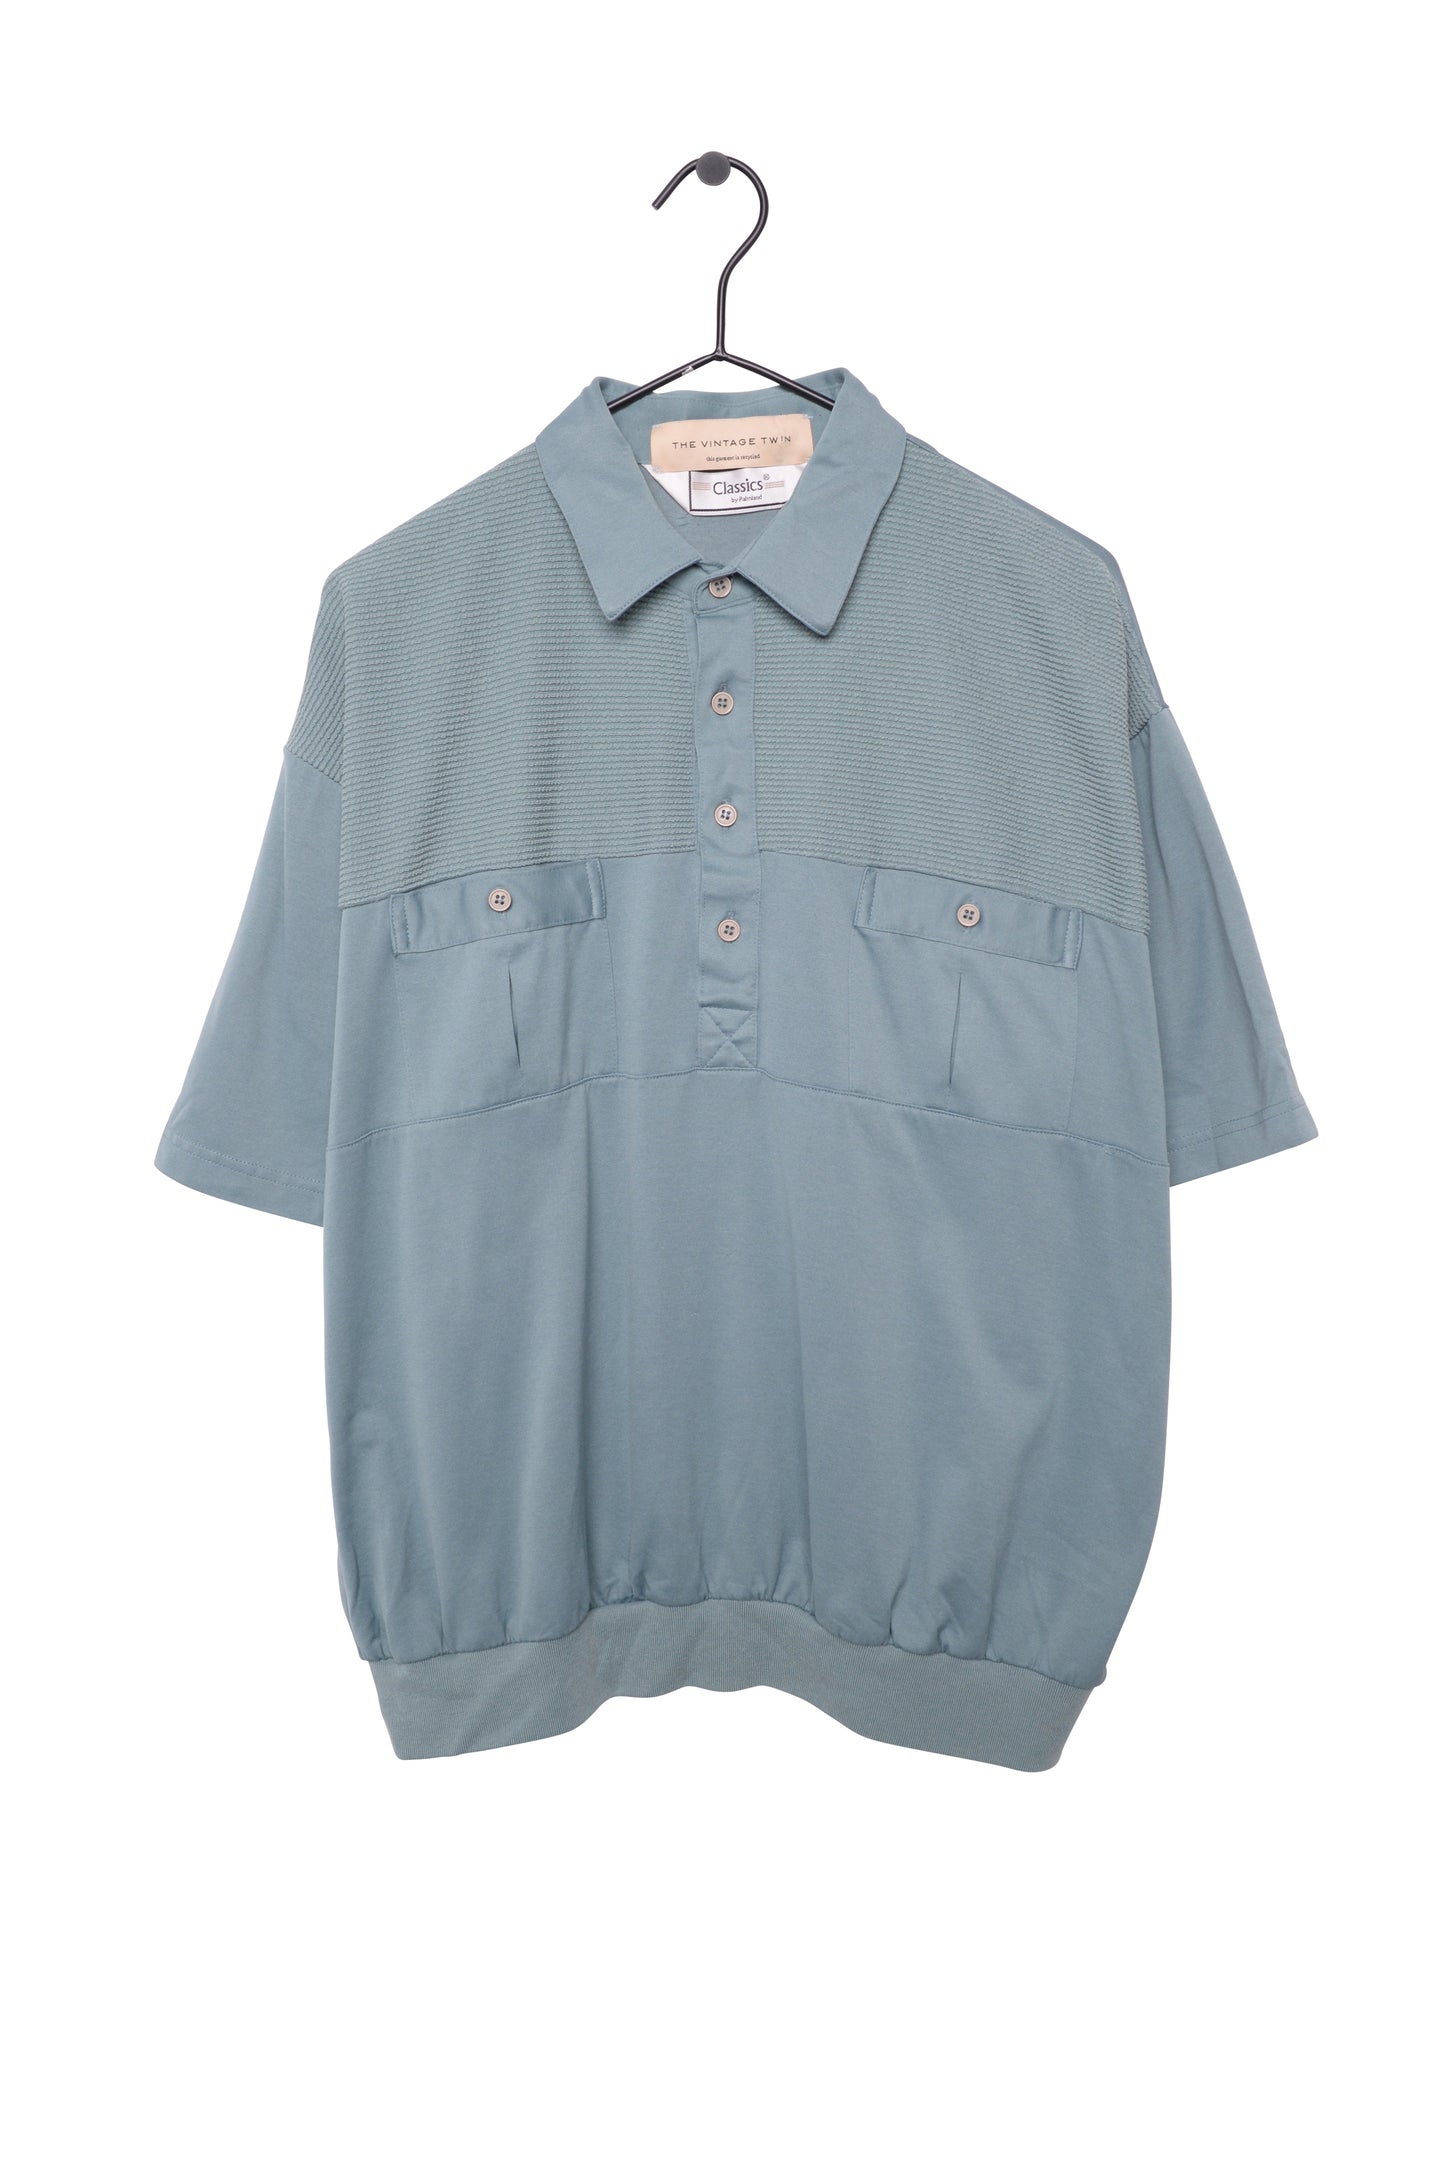 Teal Banded Polo